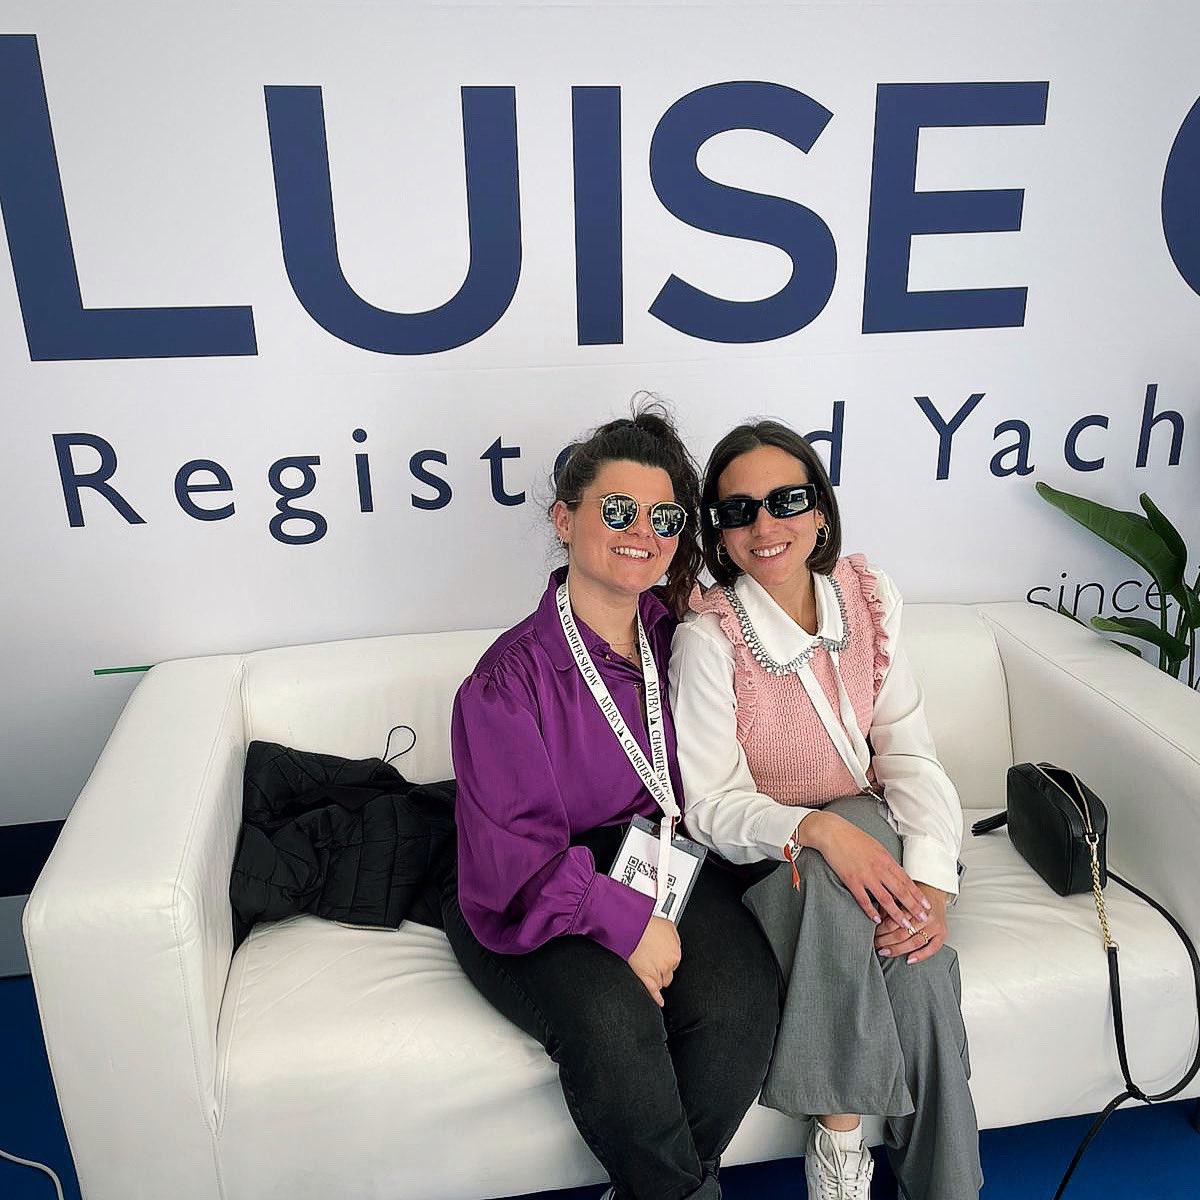 Realtime #myba #chartershow #genoa #luisegroup #team #italy #professionalyachtingservices #berthreservation #italiancoast #formalities #customs #itineraries #conciergeh24 #shipment #airports #transport #luxurycars #helicopter #medicalassistance - luise.com